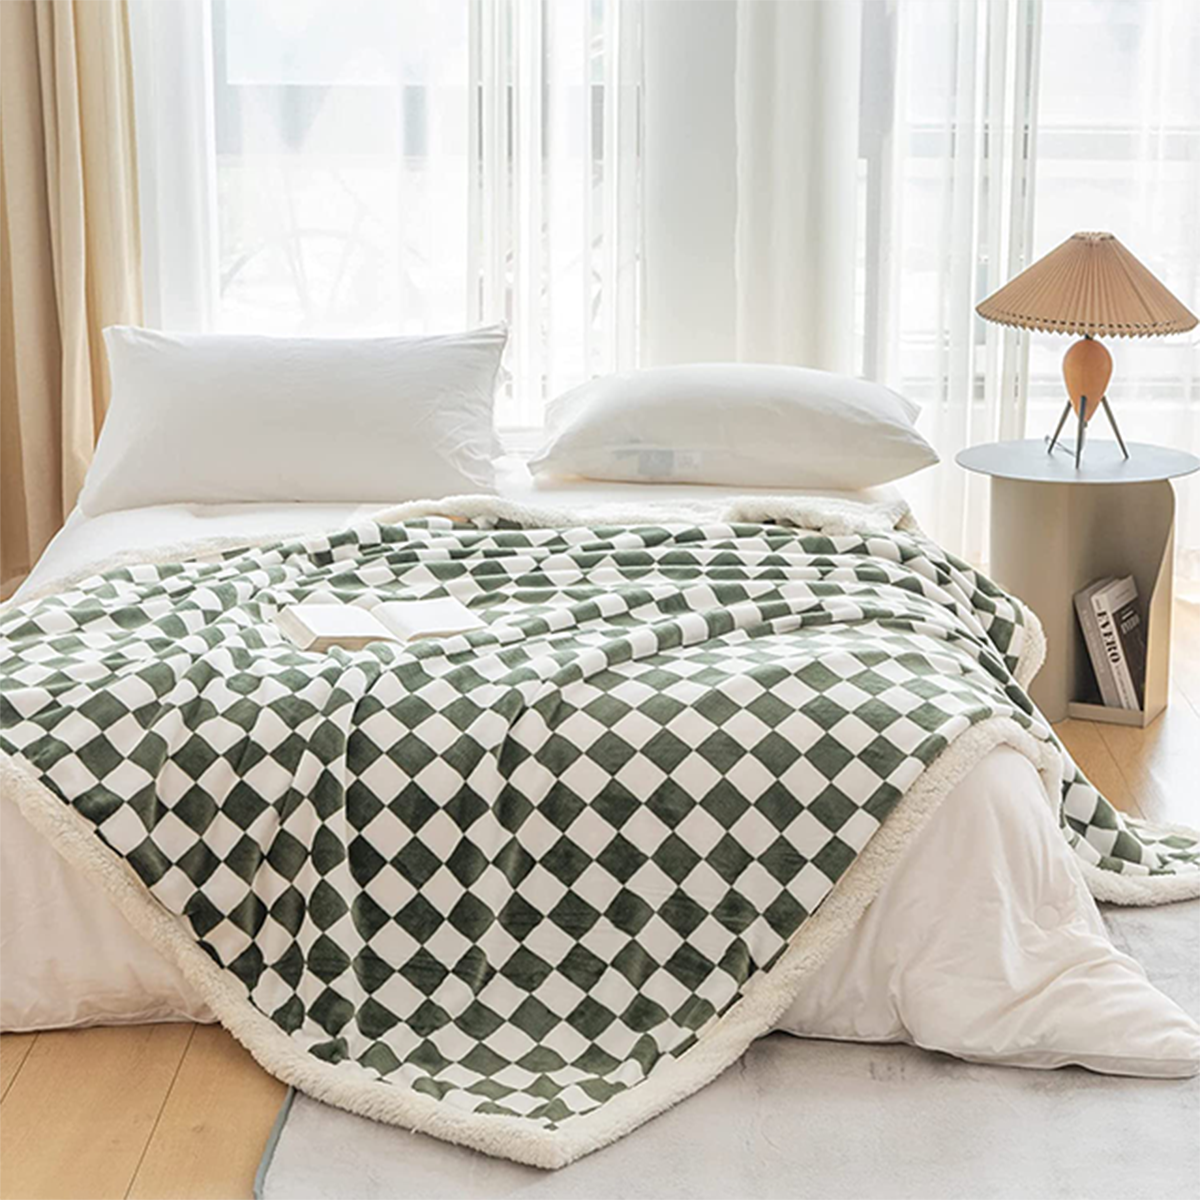 Trendy, Affordable Throw Blankets From Amazon for Every Home Aesthetic